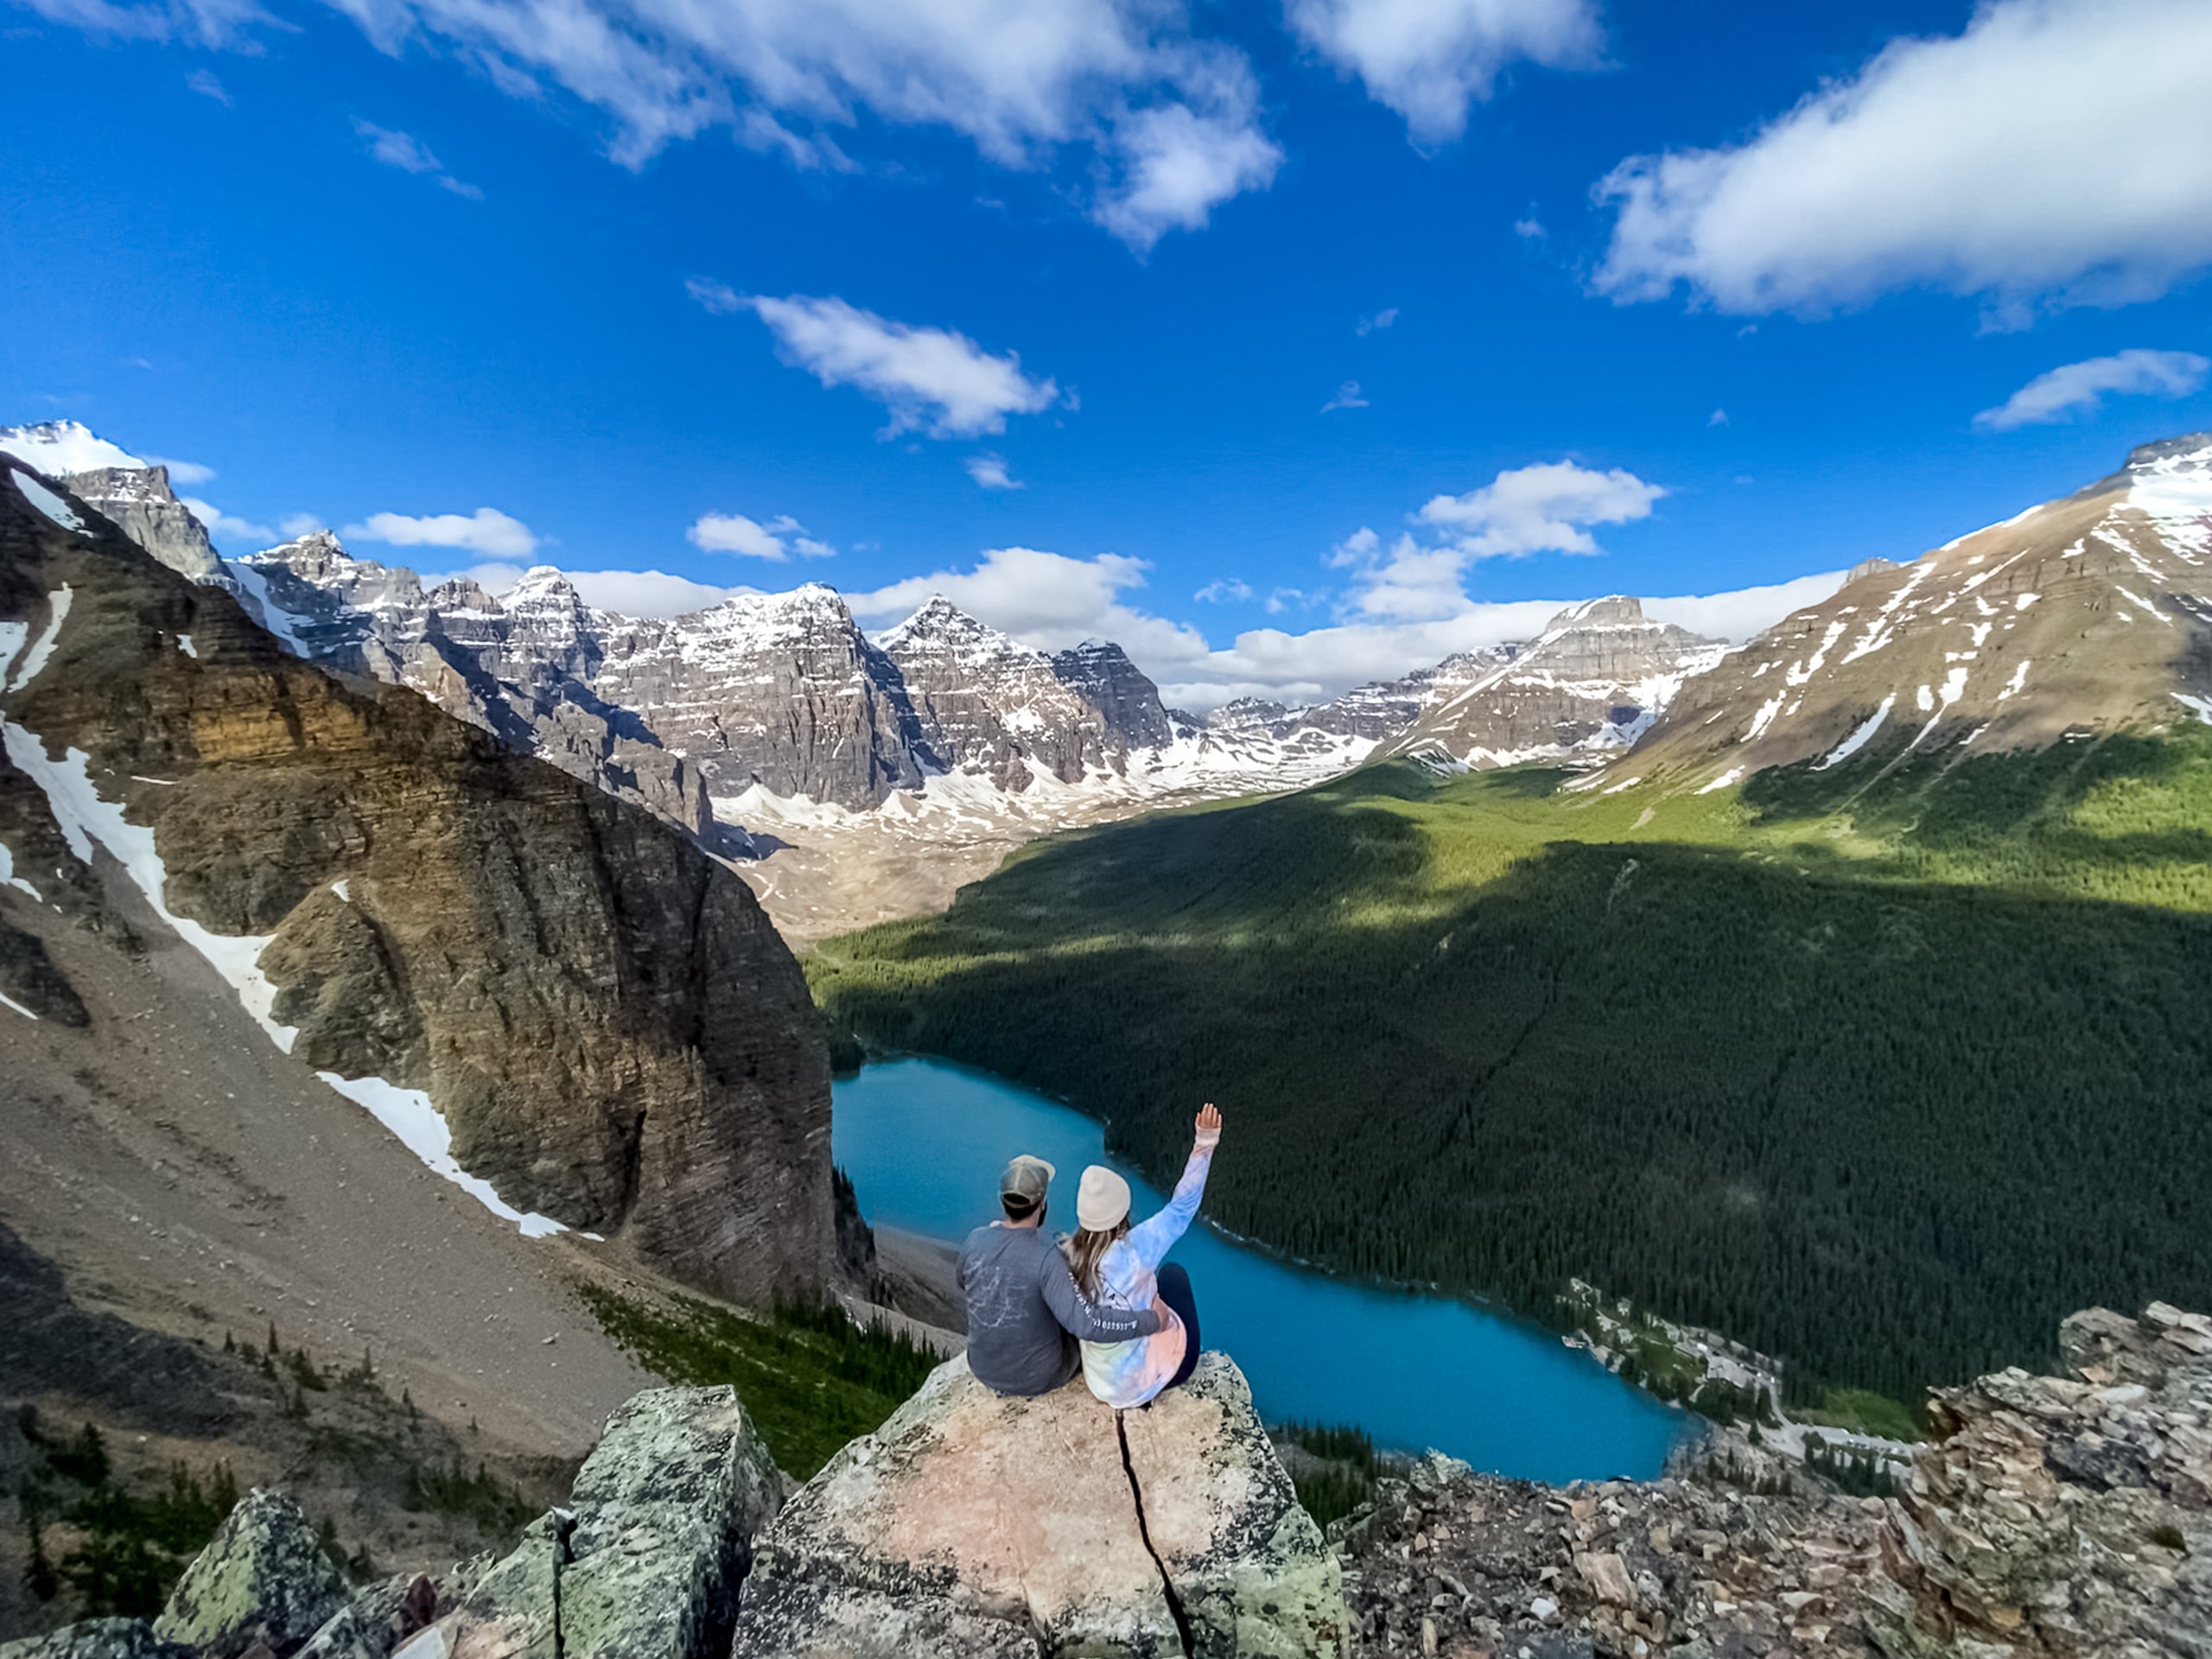 Top of the Tower of Babel overlooking Moraine Lake